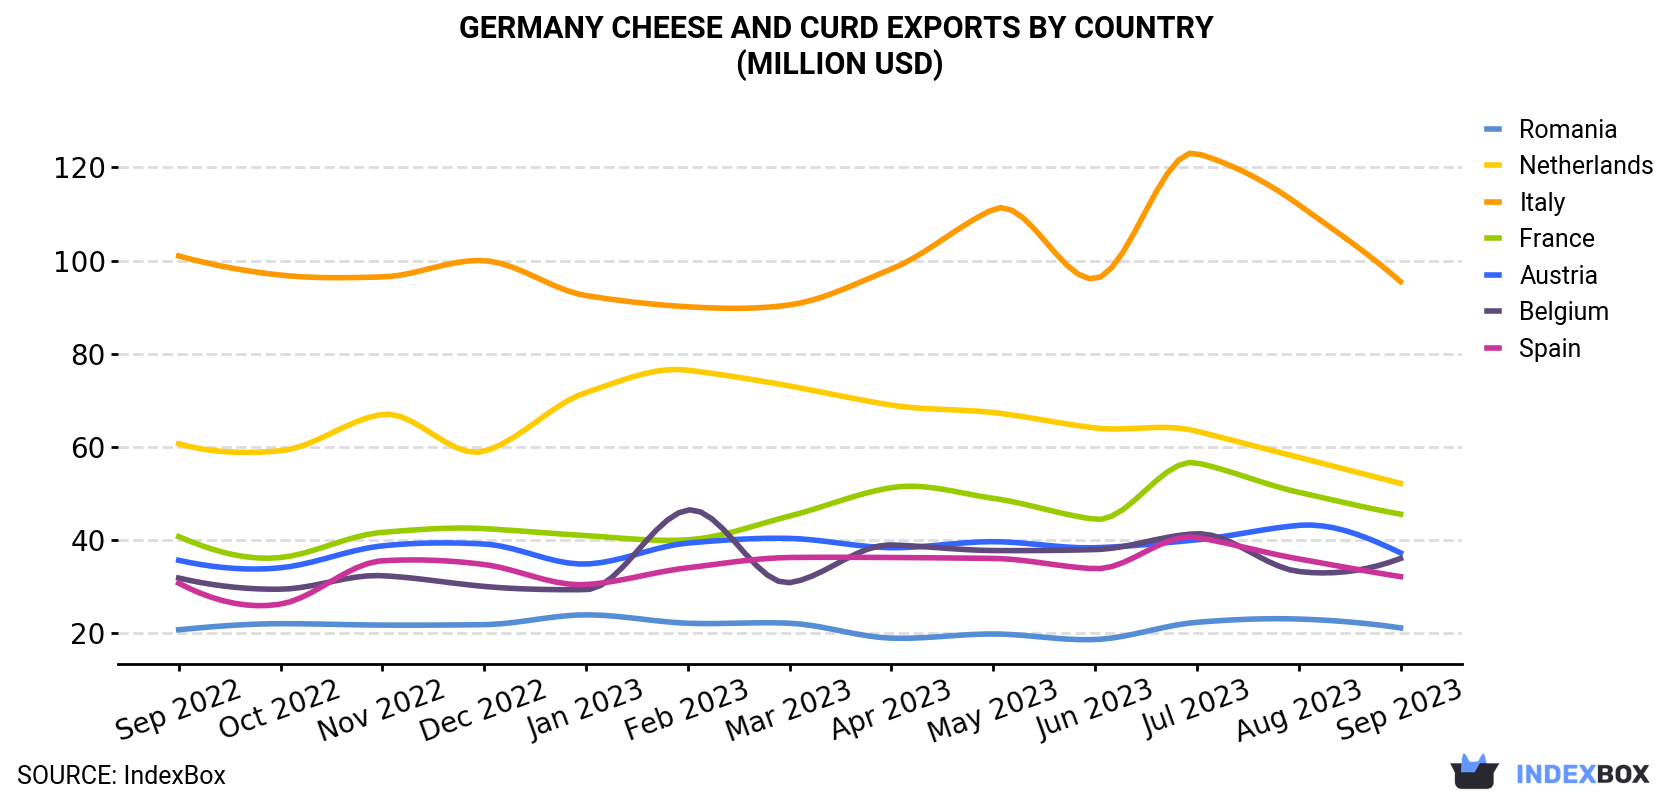 Germany Cheese and Curd Exports By Country (Million USD)